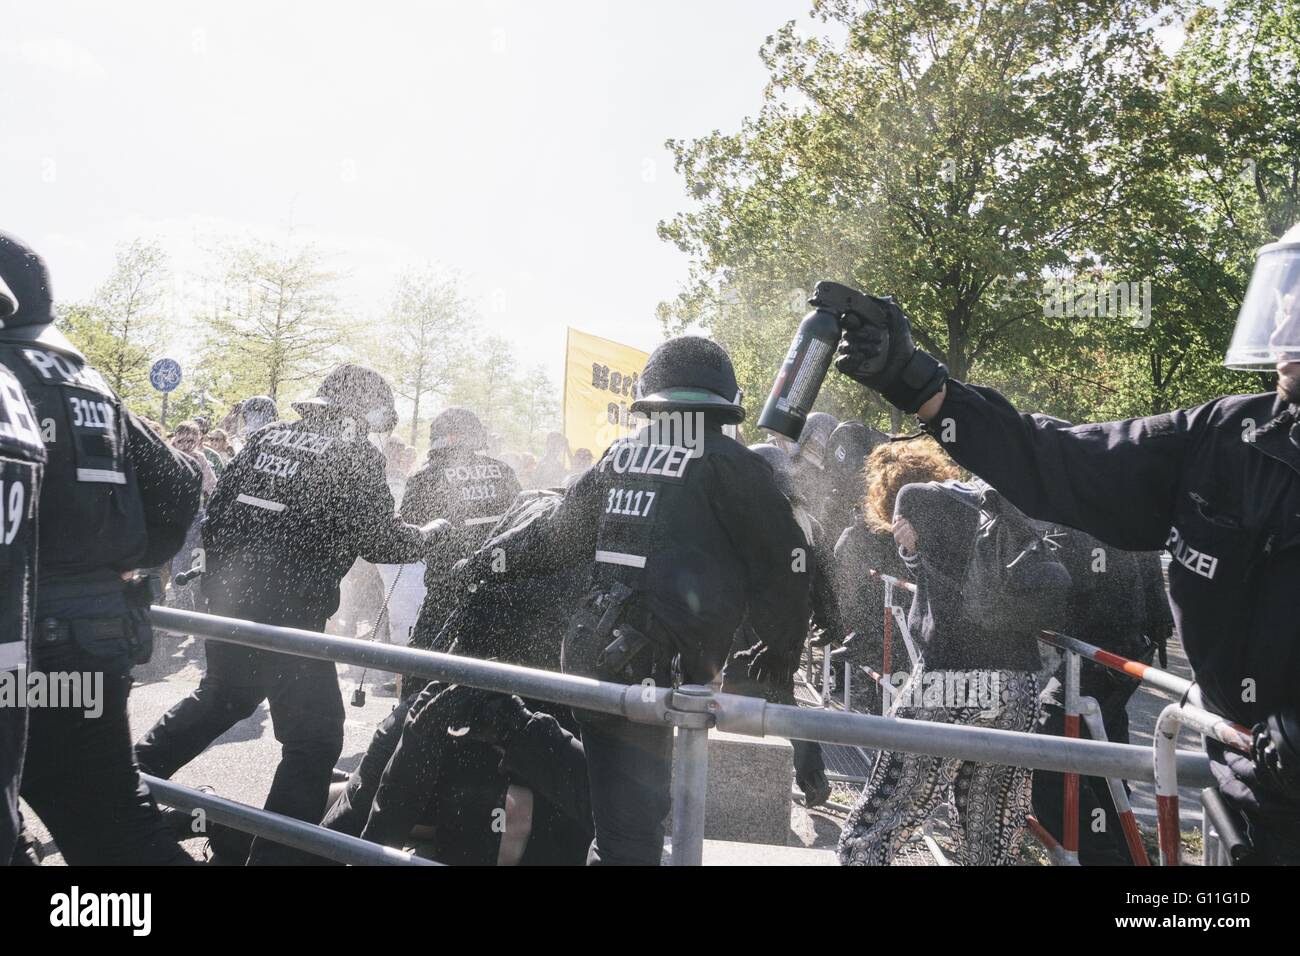 Berlin, Berlin, Germany. 7th May, 2016. Police spraying pepper spray during counter protests against the rally held under the motto 'Merkel muss weg![Merkel must go]' organised by far-right group 'We for Berlin & We for Germany' Credit:  Jan Scheunert/ZUMA Wire/Alamy Live News Stock Photo